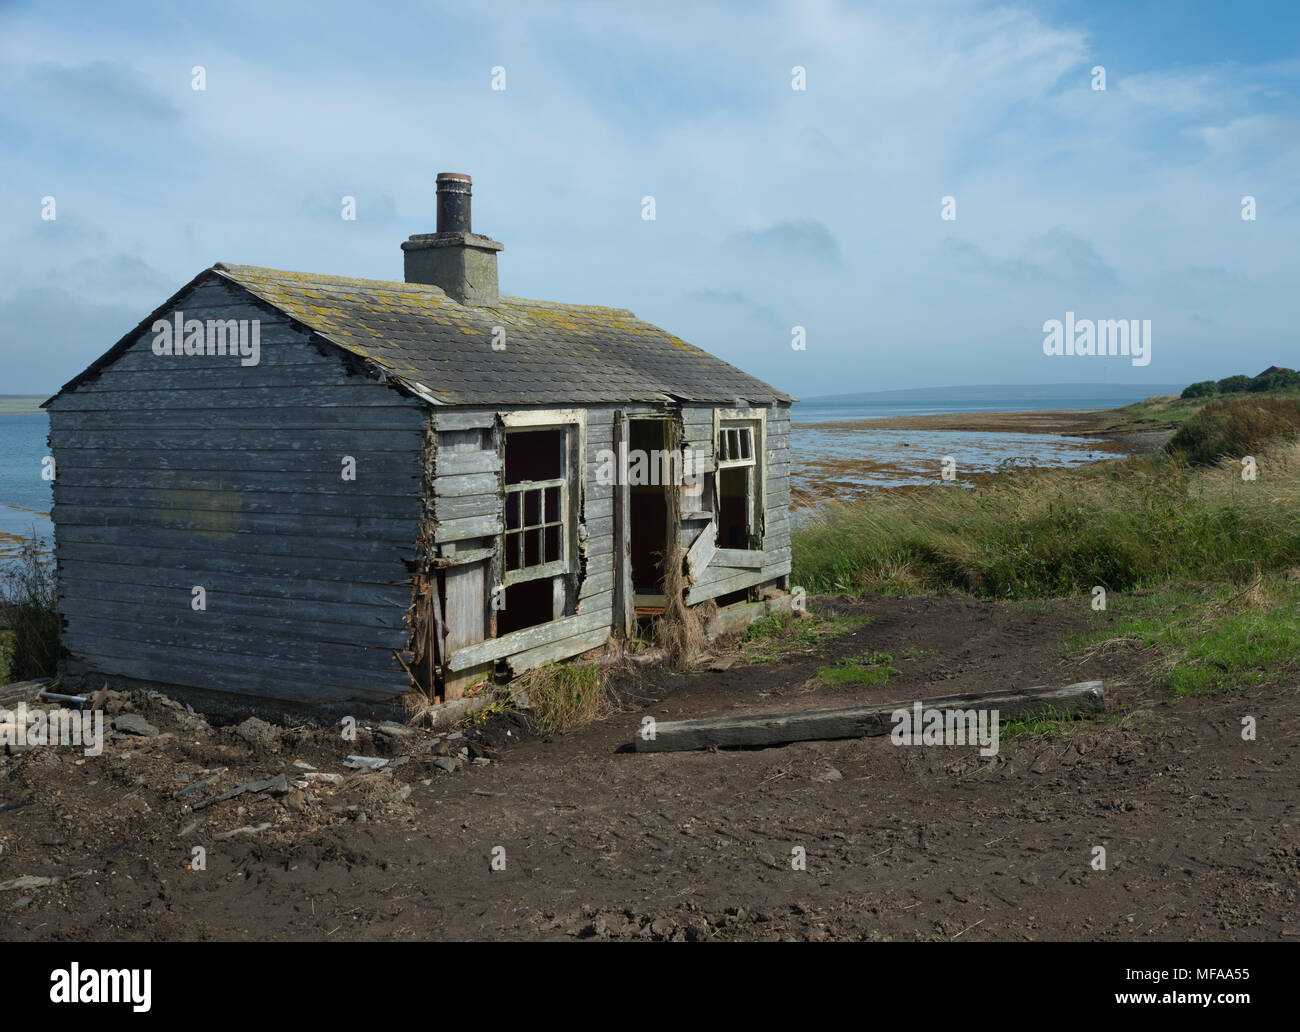 The Old Shack By The Sea, Hoy, Orkney Stock Photo